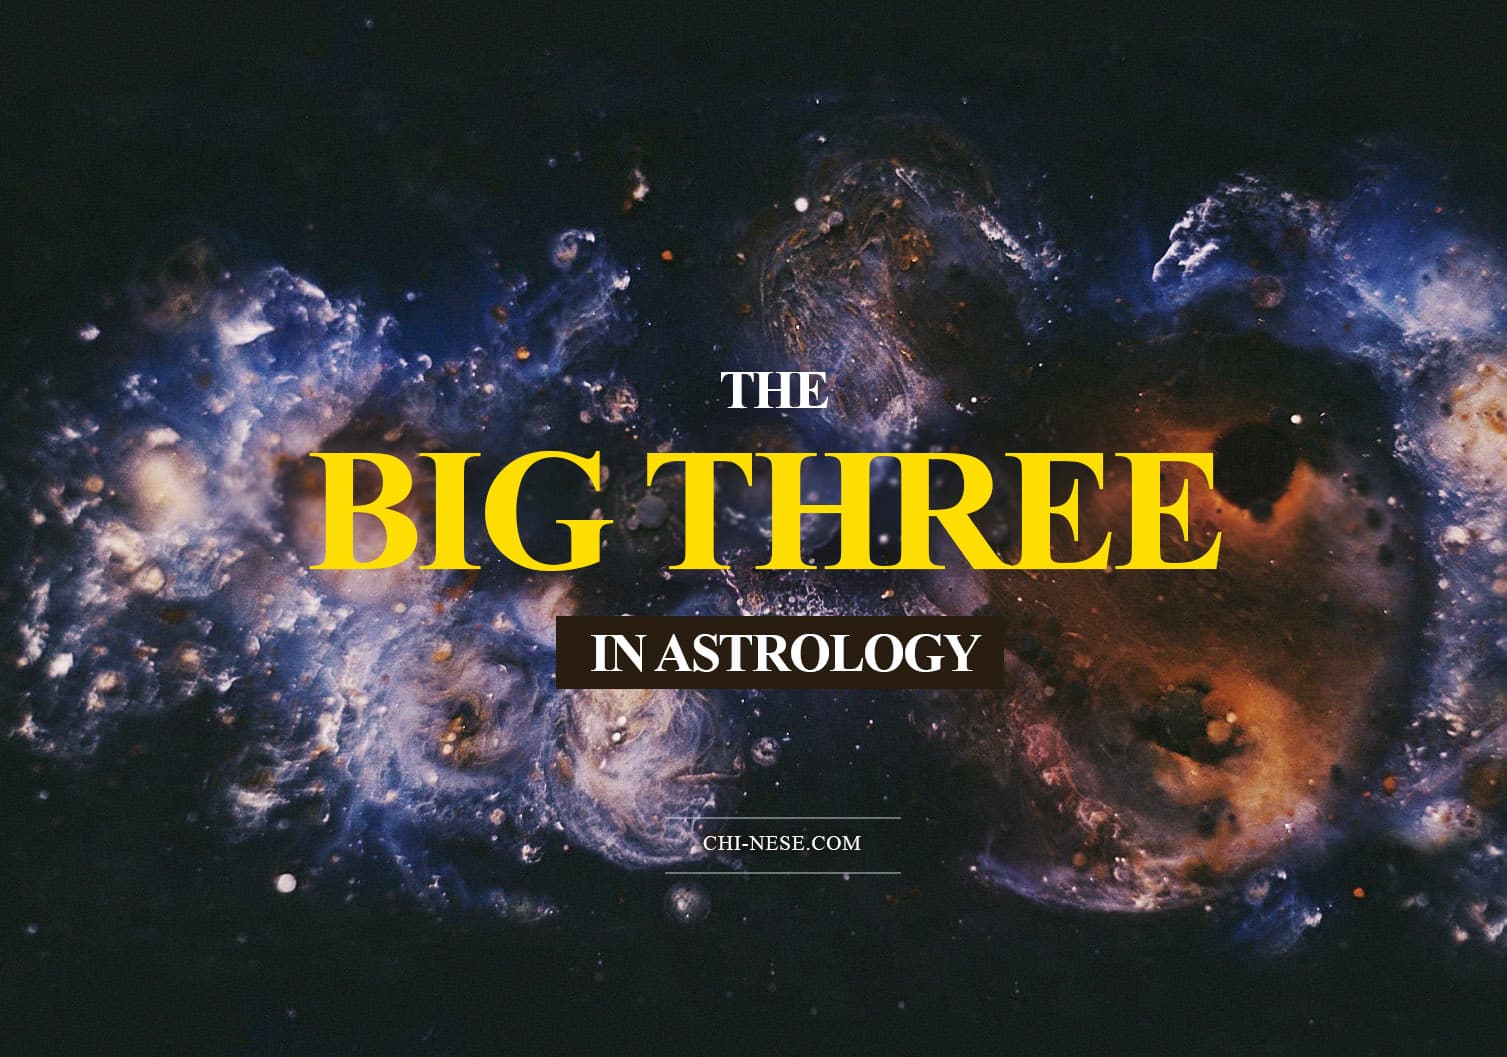 the big three in astrology